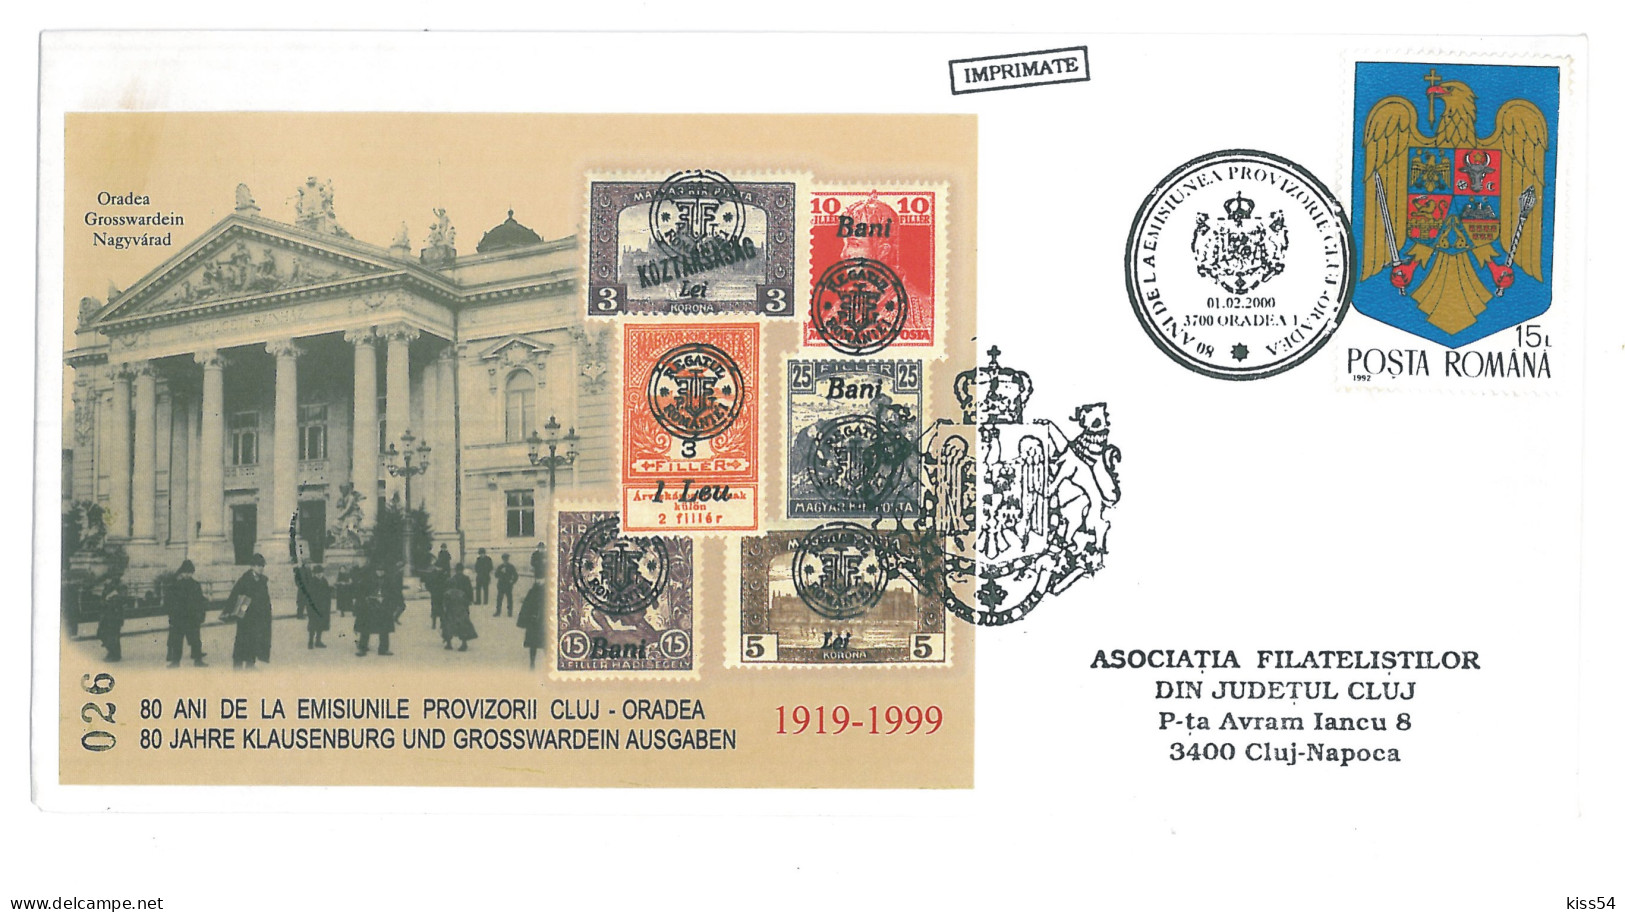 COV 91 - 3030 80 Years Since The Cluj-Oradea Philatelic Edition, Romania - Cover - Used - 2000 - Parcel Post